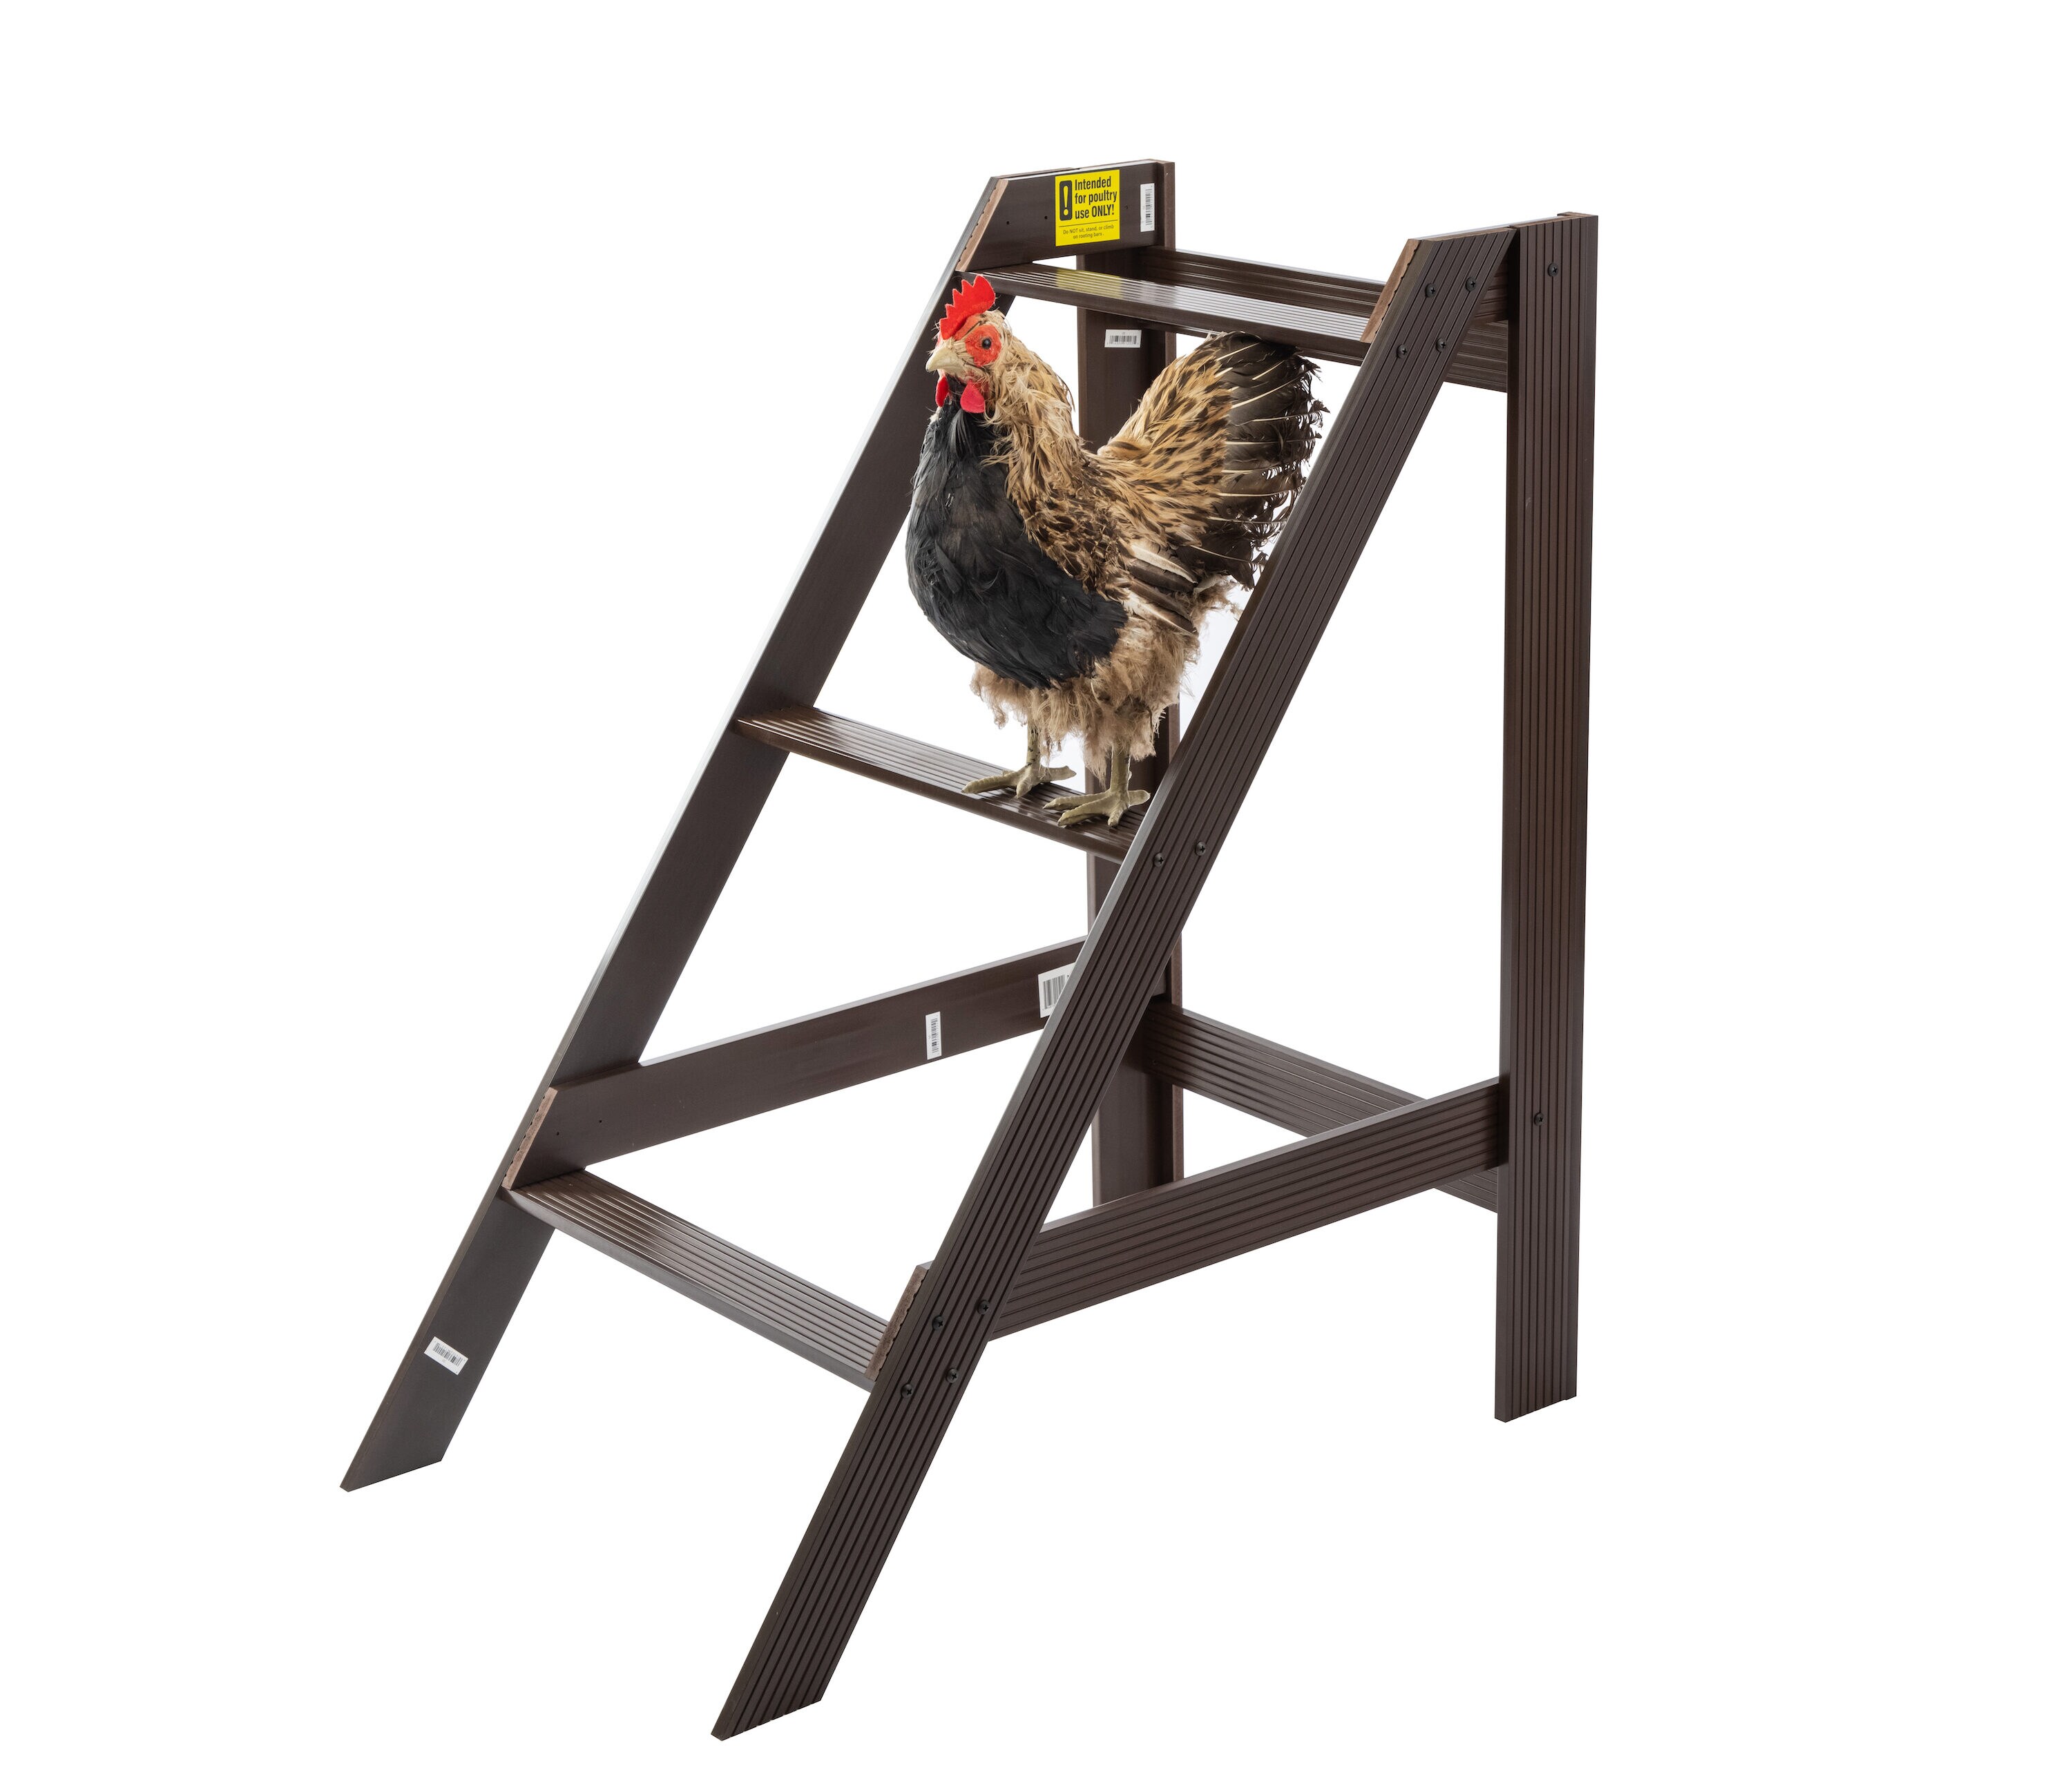 New Age Pet Restful Walnut Roosting Bar - Durable Composite Material - 3-in  Wide Surface - Available in 2 Sizes - Keep Your Chickens' Feet Warm &  Healthy in the Chicken Coops